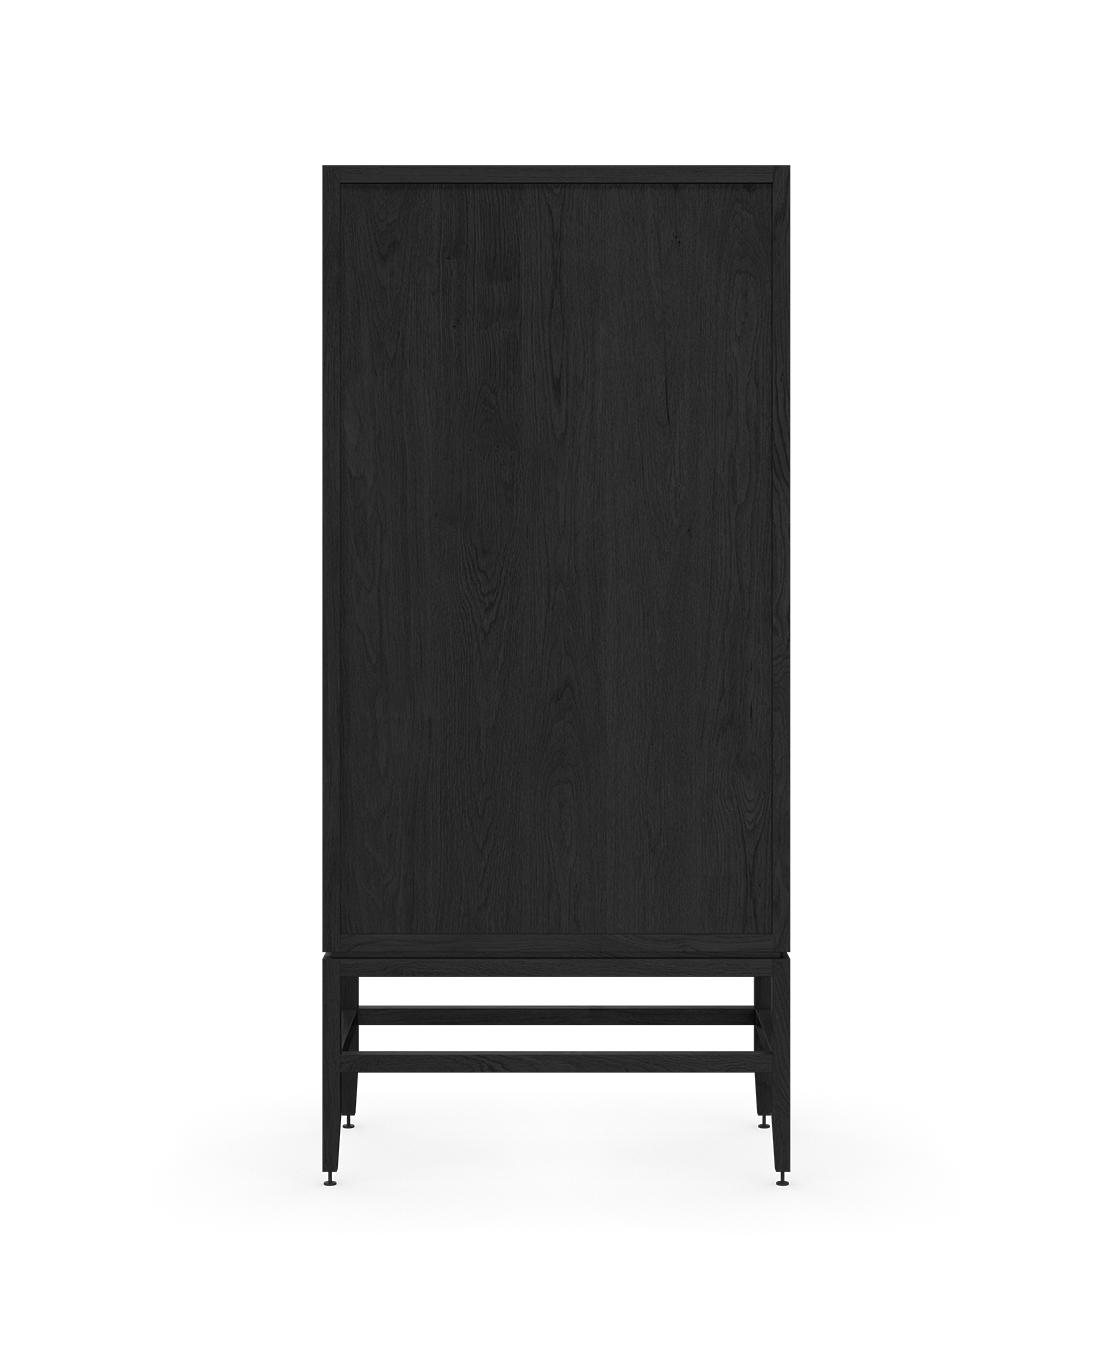 coquo freestanding armoire in black stained oak with wood doors. Can be used as a pantry, buffet, wardrobe, pharmacy.